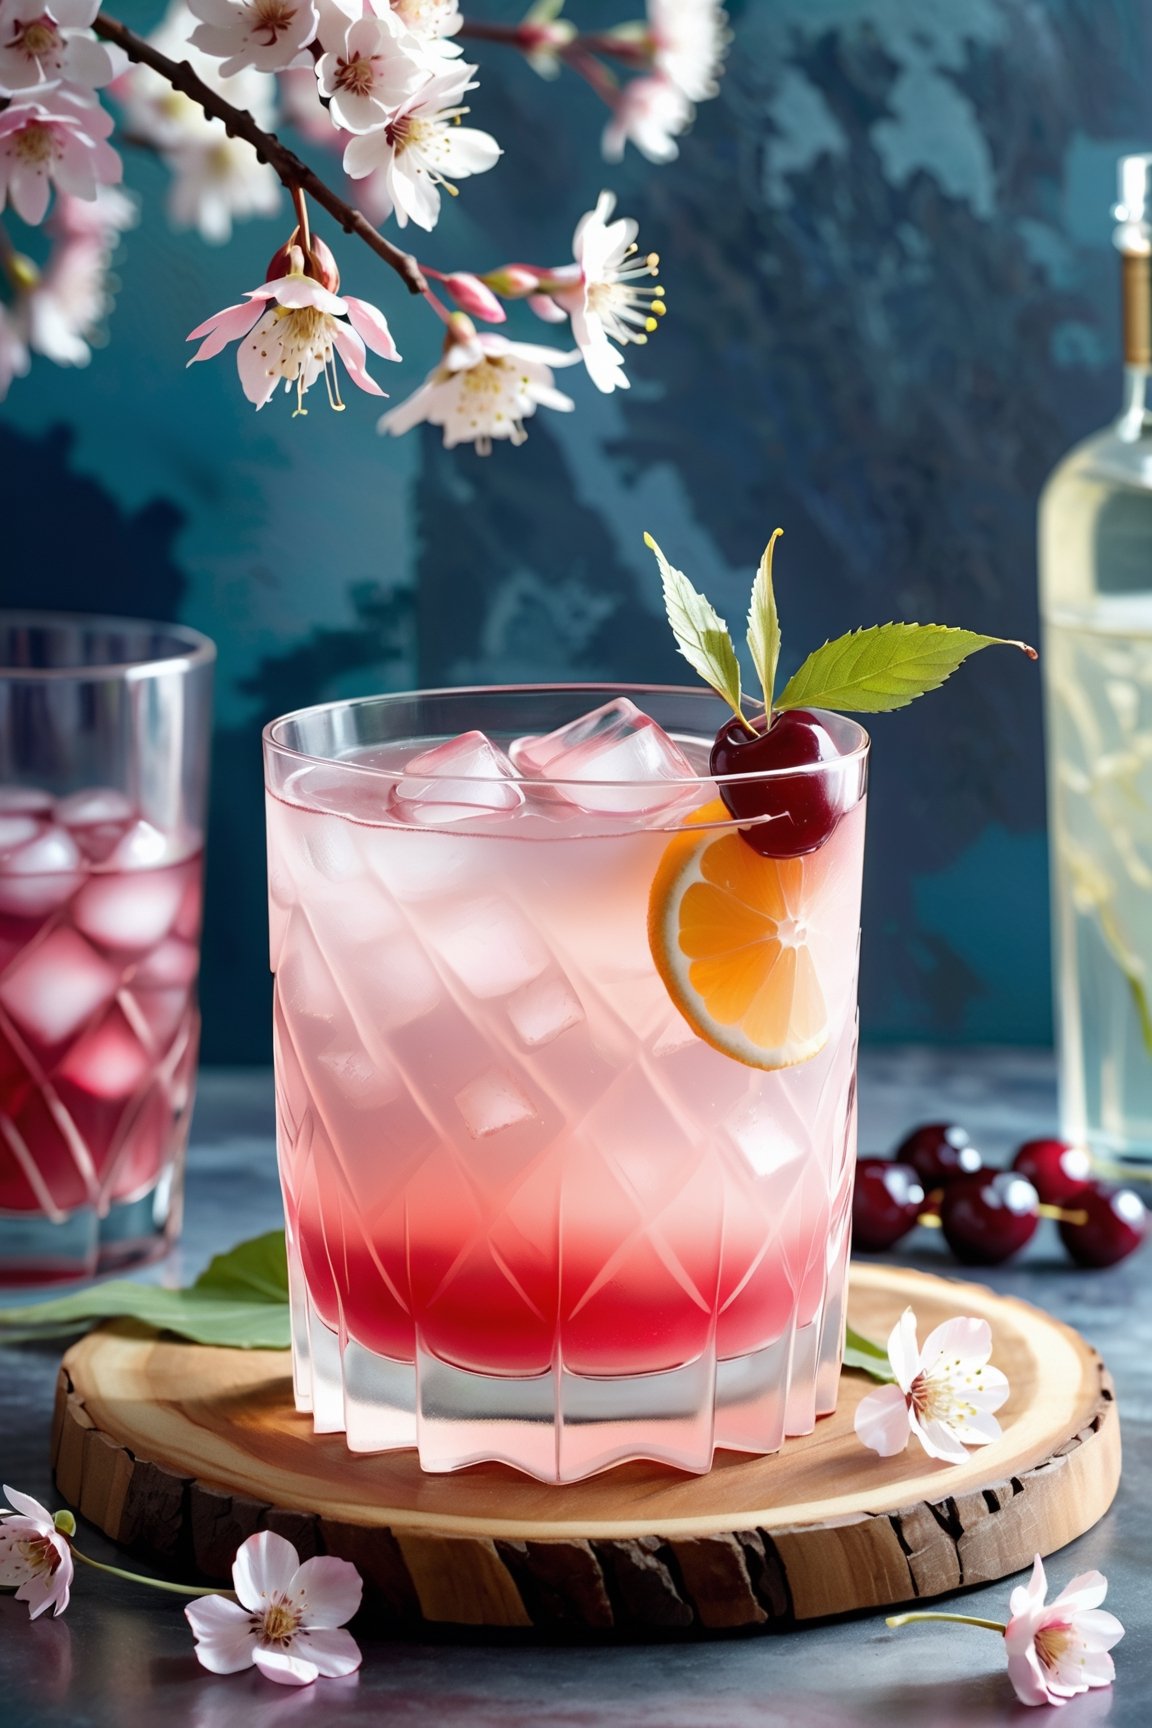 A refreshing cocktail with cherry blossom-infused vodka and a hint of elderflower liqueur.